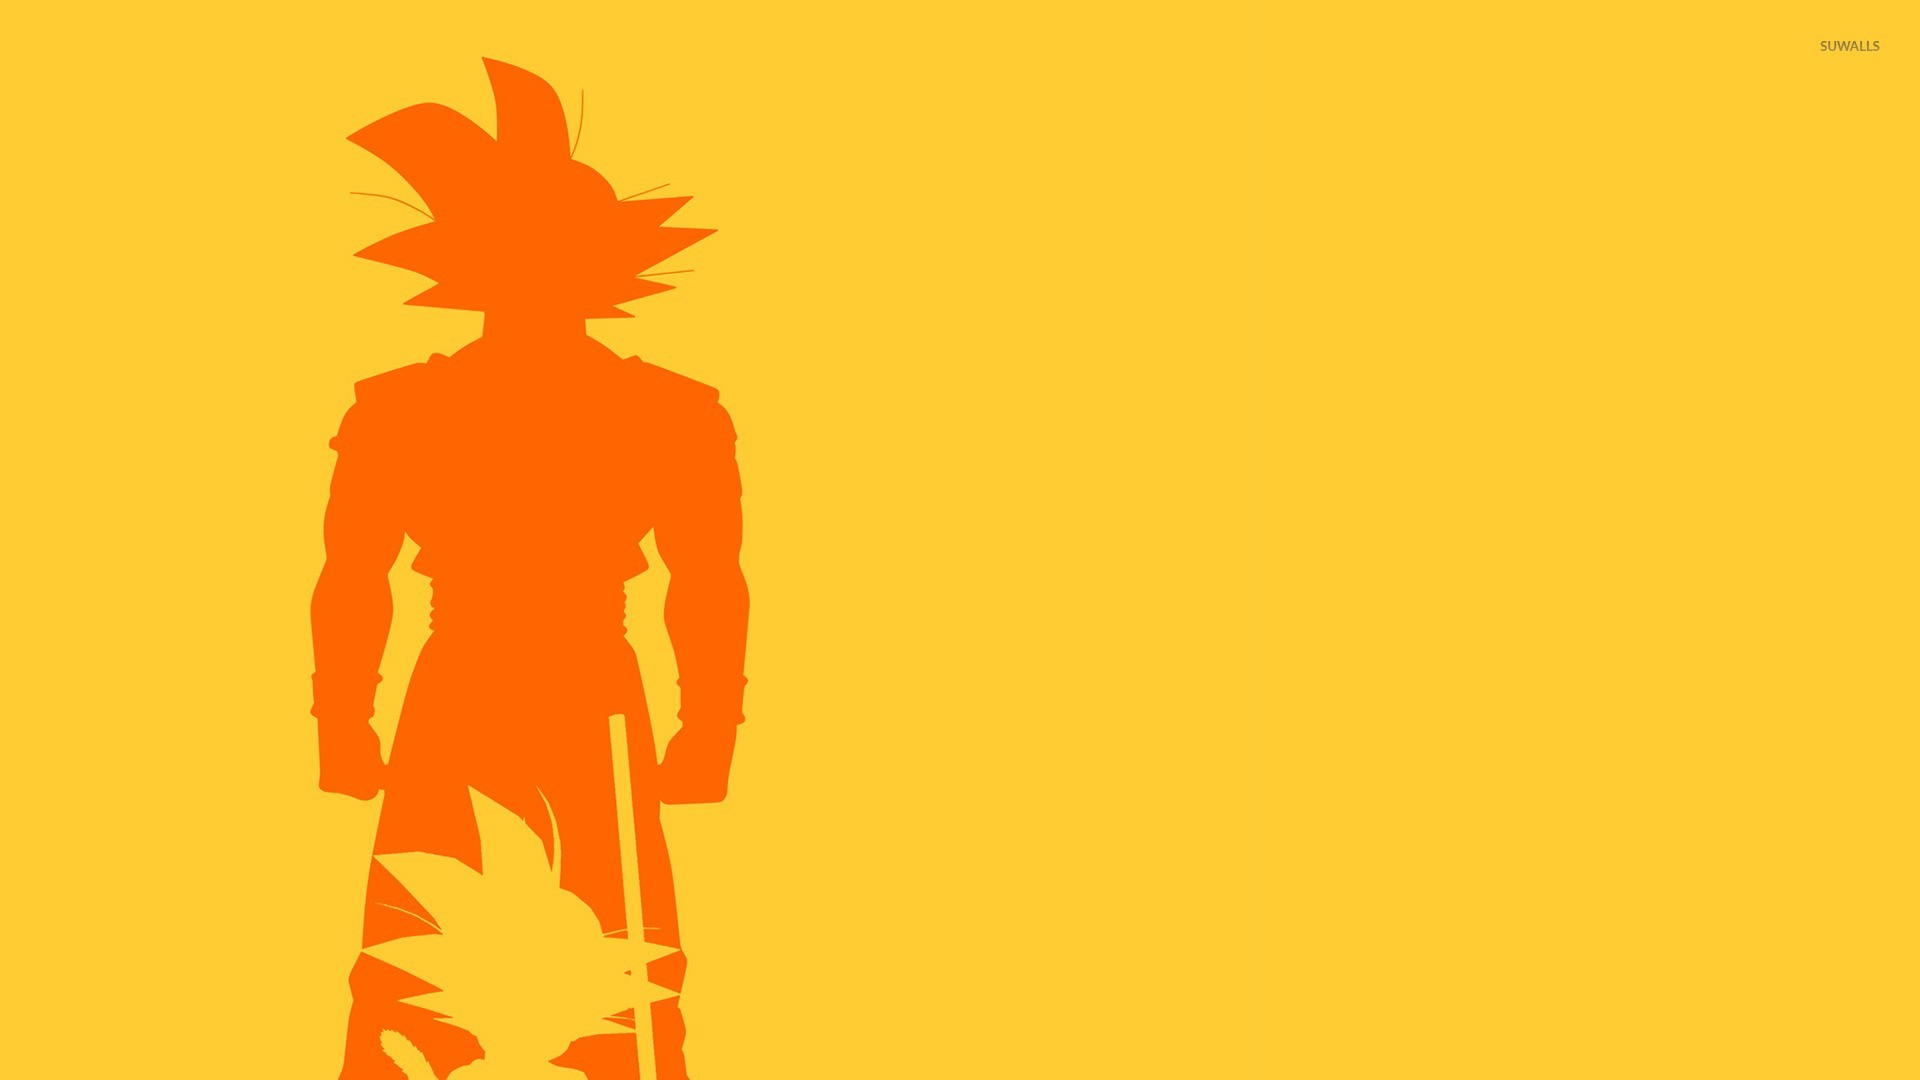 Goku Imagenes HD Wallpaper With Resolution 1920X1080 pixel. You can make this wallpaper for your Desktop Computer Backgrounds, Mac Wallpapers, Android Lock screen or iPhone Screensavers